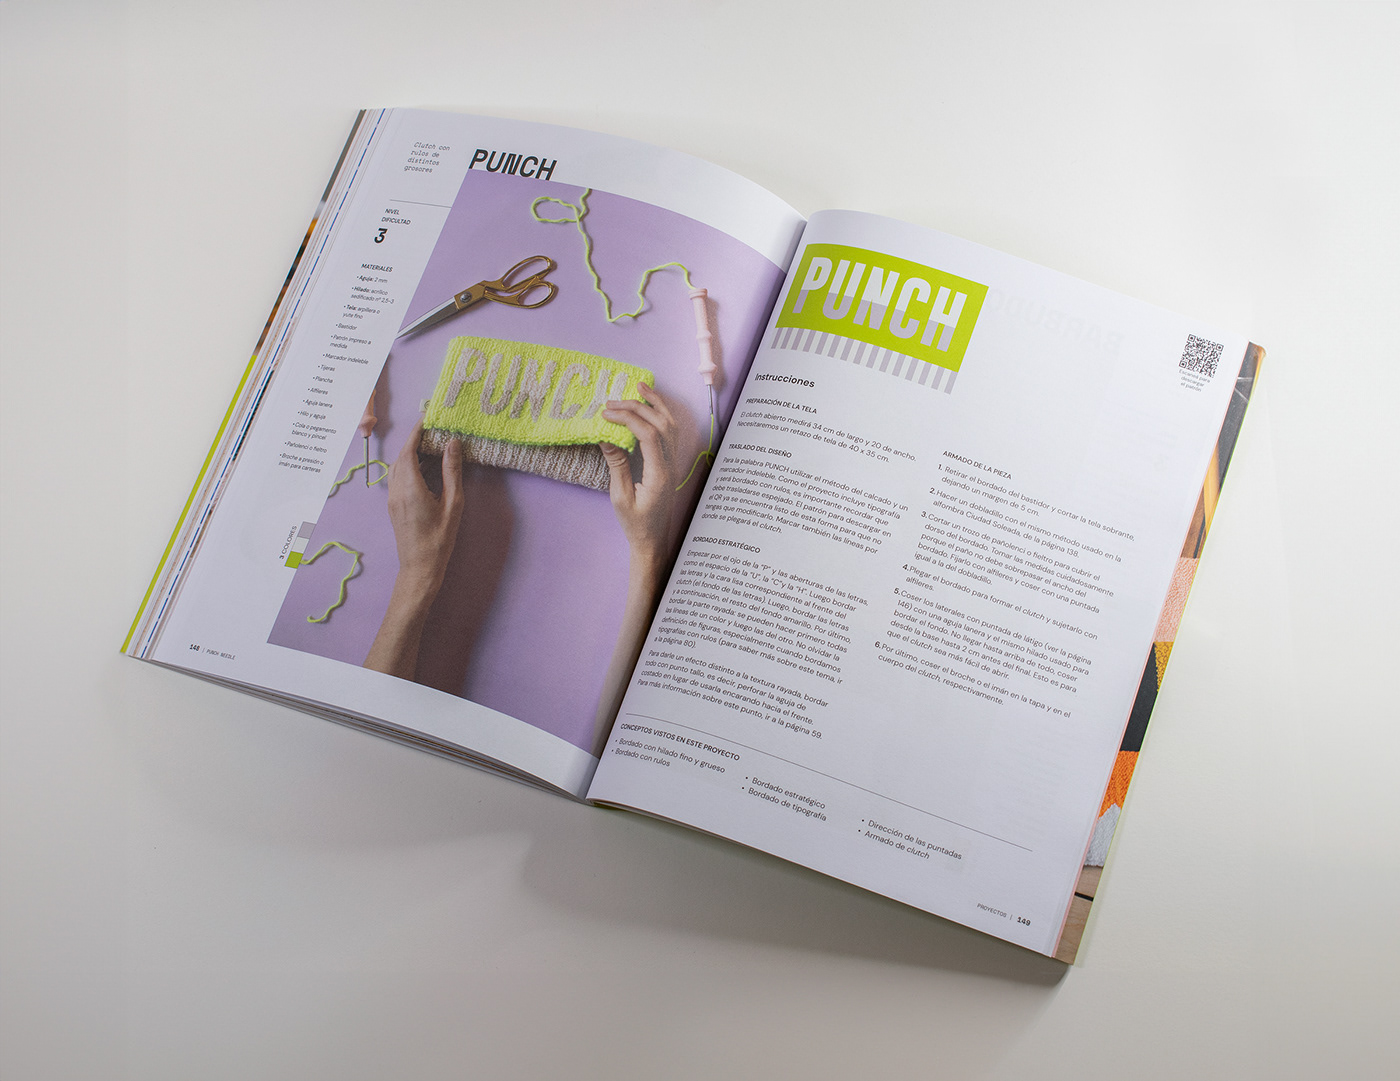 Embroidery editorial book Layout editorial design  color textile pattern design  book cover book design